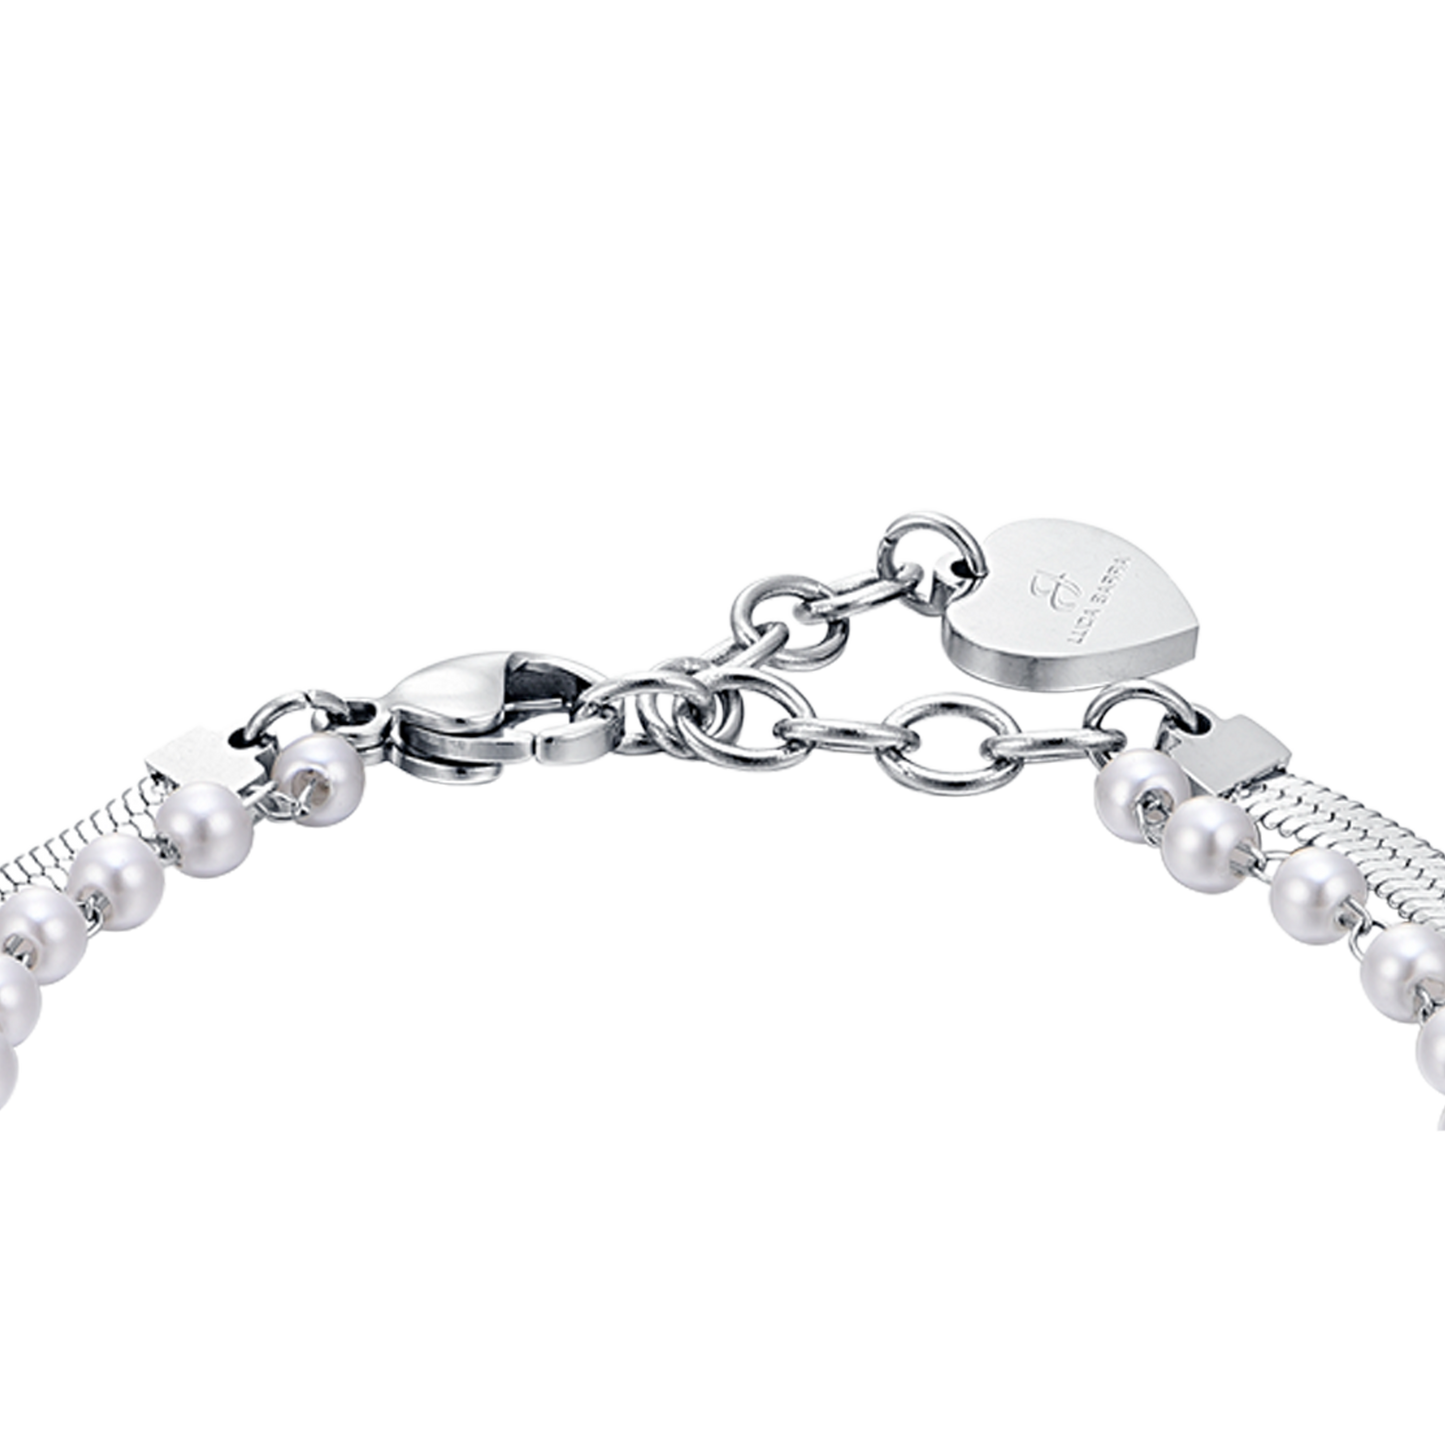 WOMAN'S BRACELET IN STEEL WITH WHITE PEARLS, STARS AND CRYSTALS Luca Barra